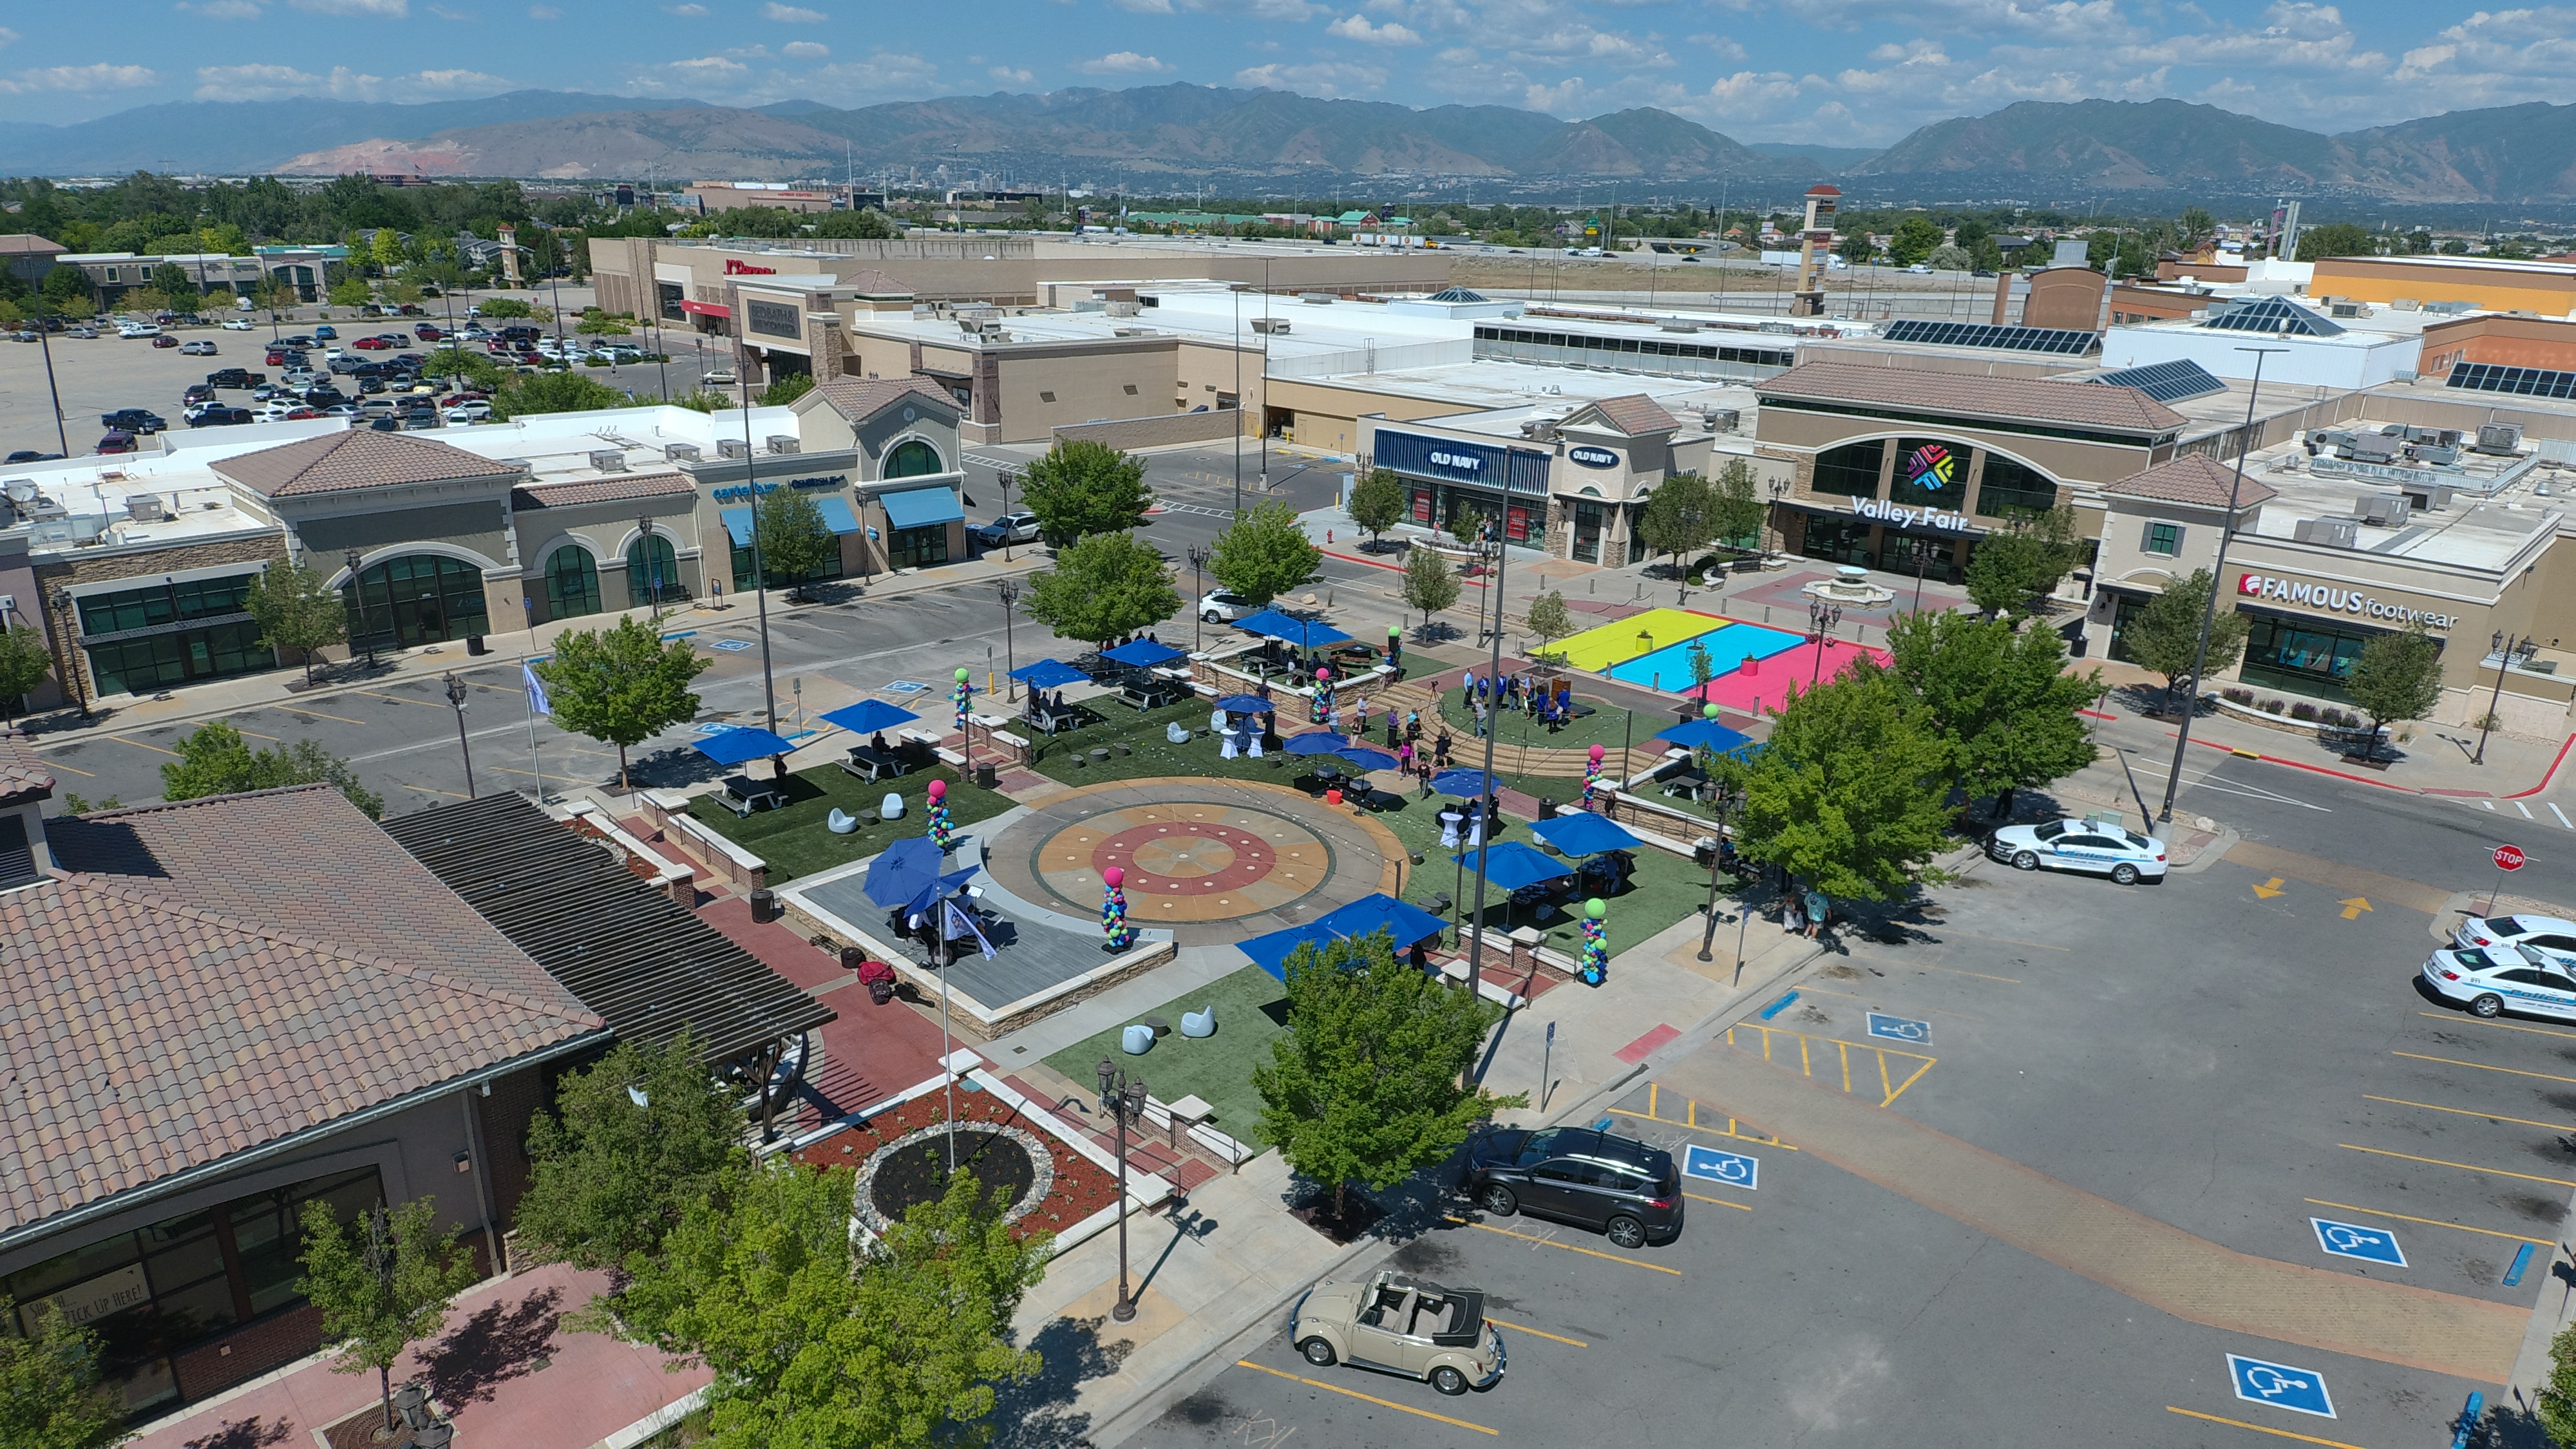 Town Center at Valley Fair hopes to be a public gathering hotspot